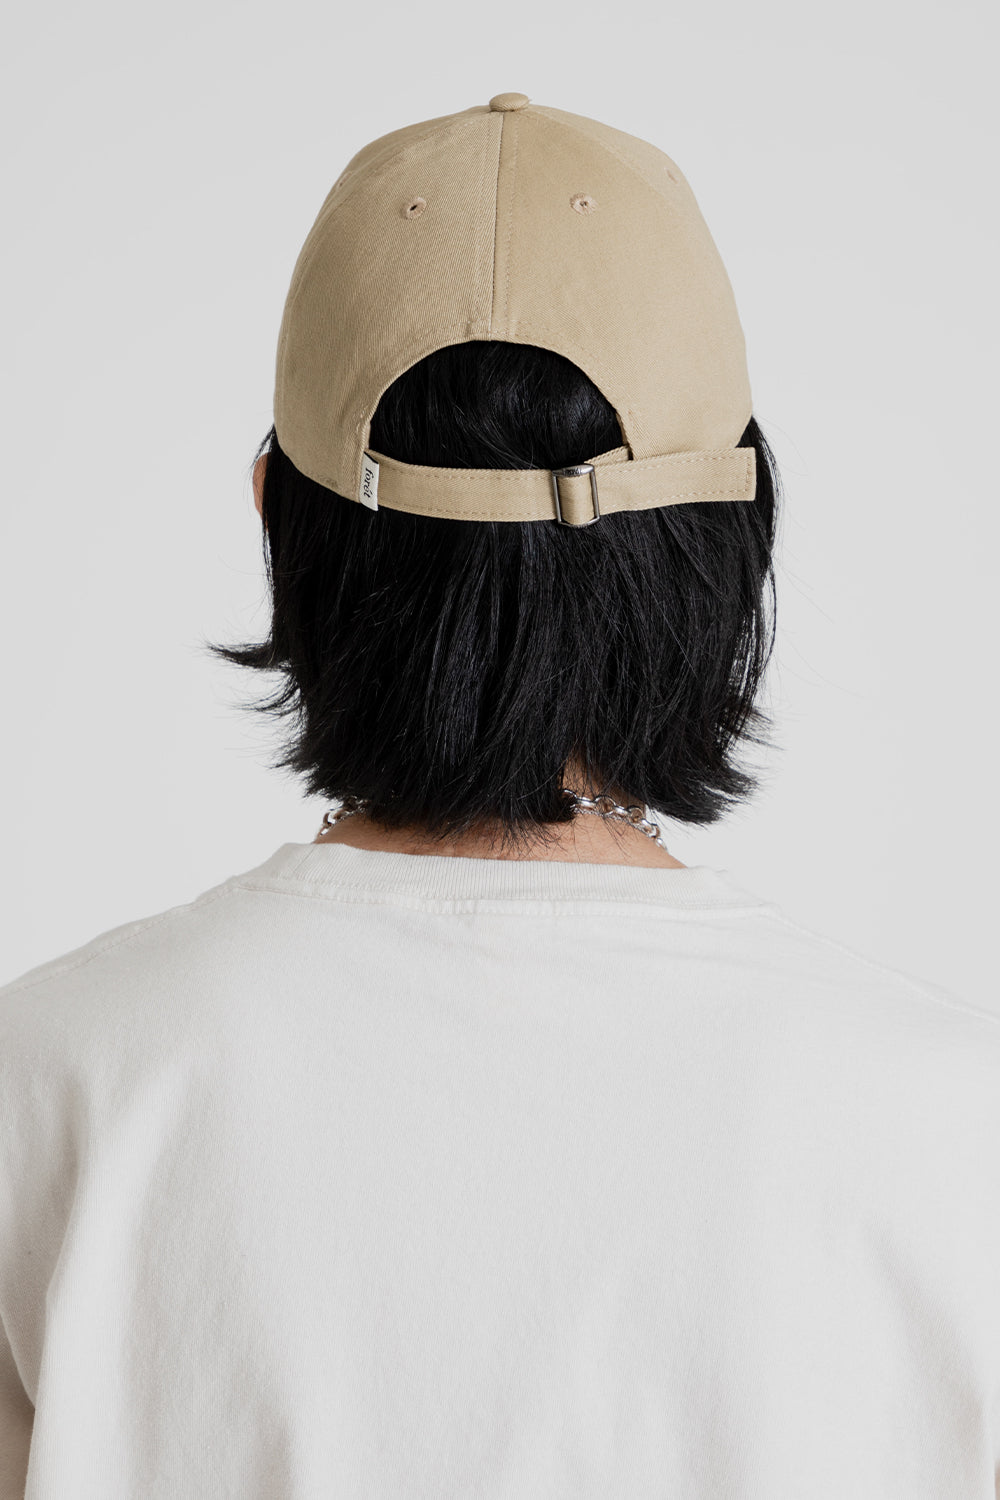 Foret Mate Cap in Khaki and Army